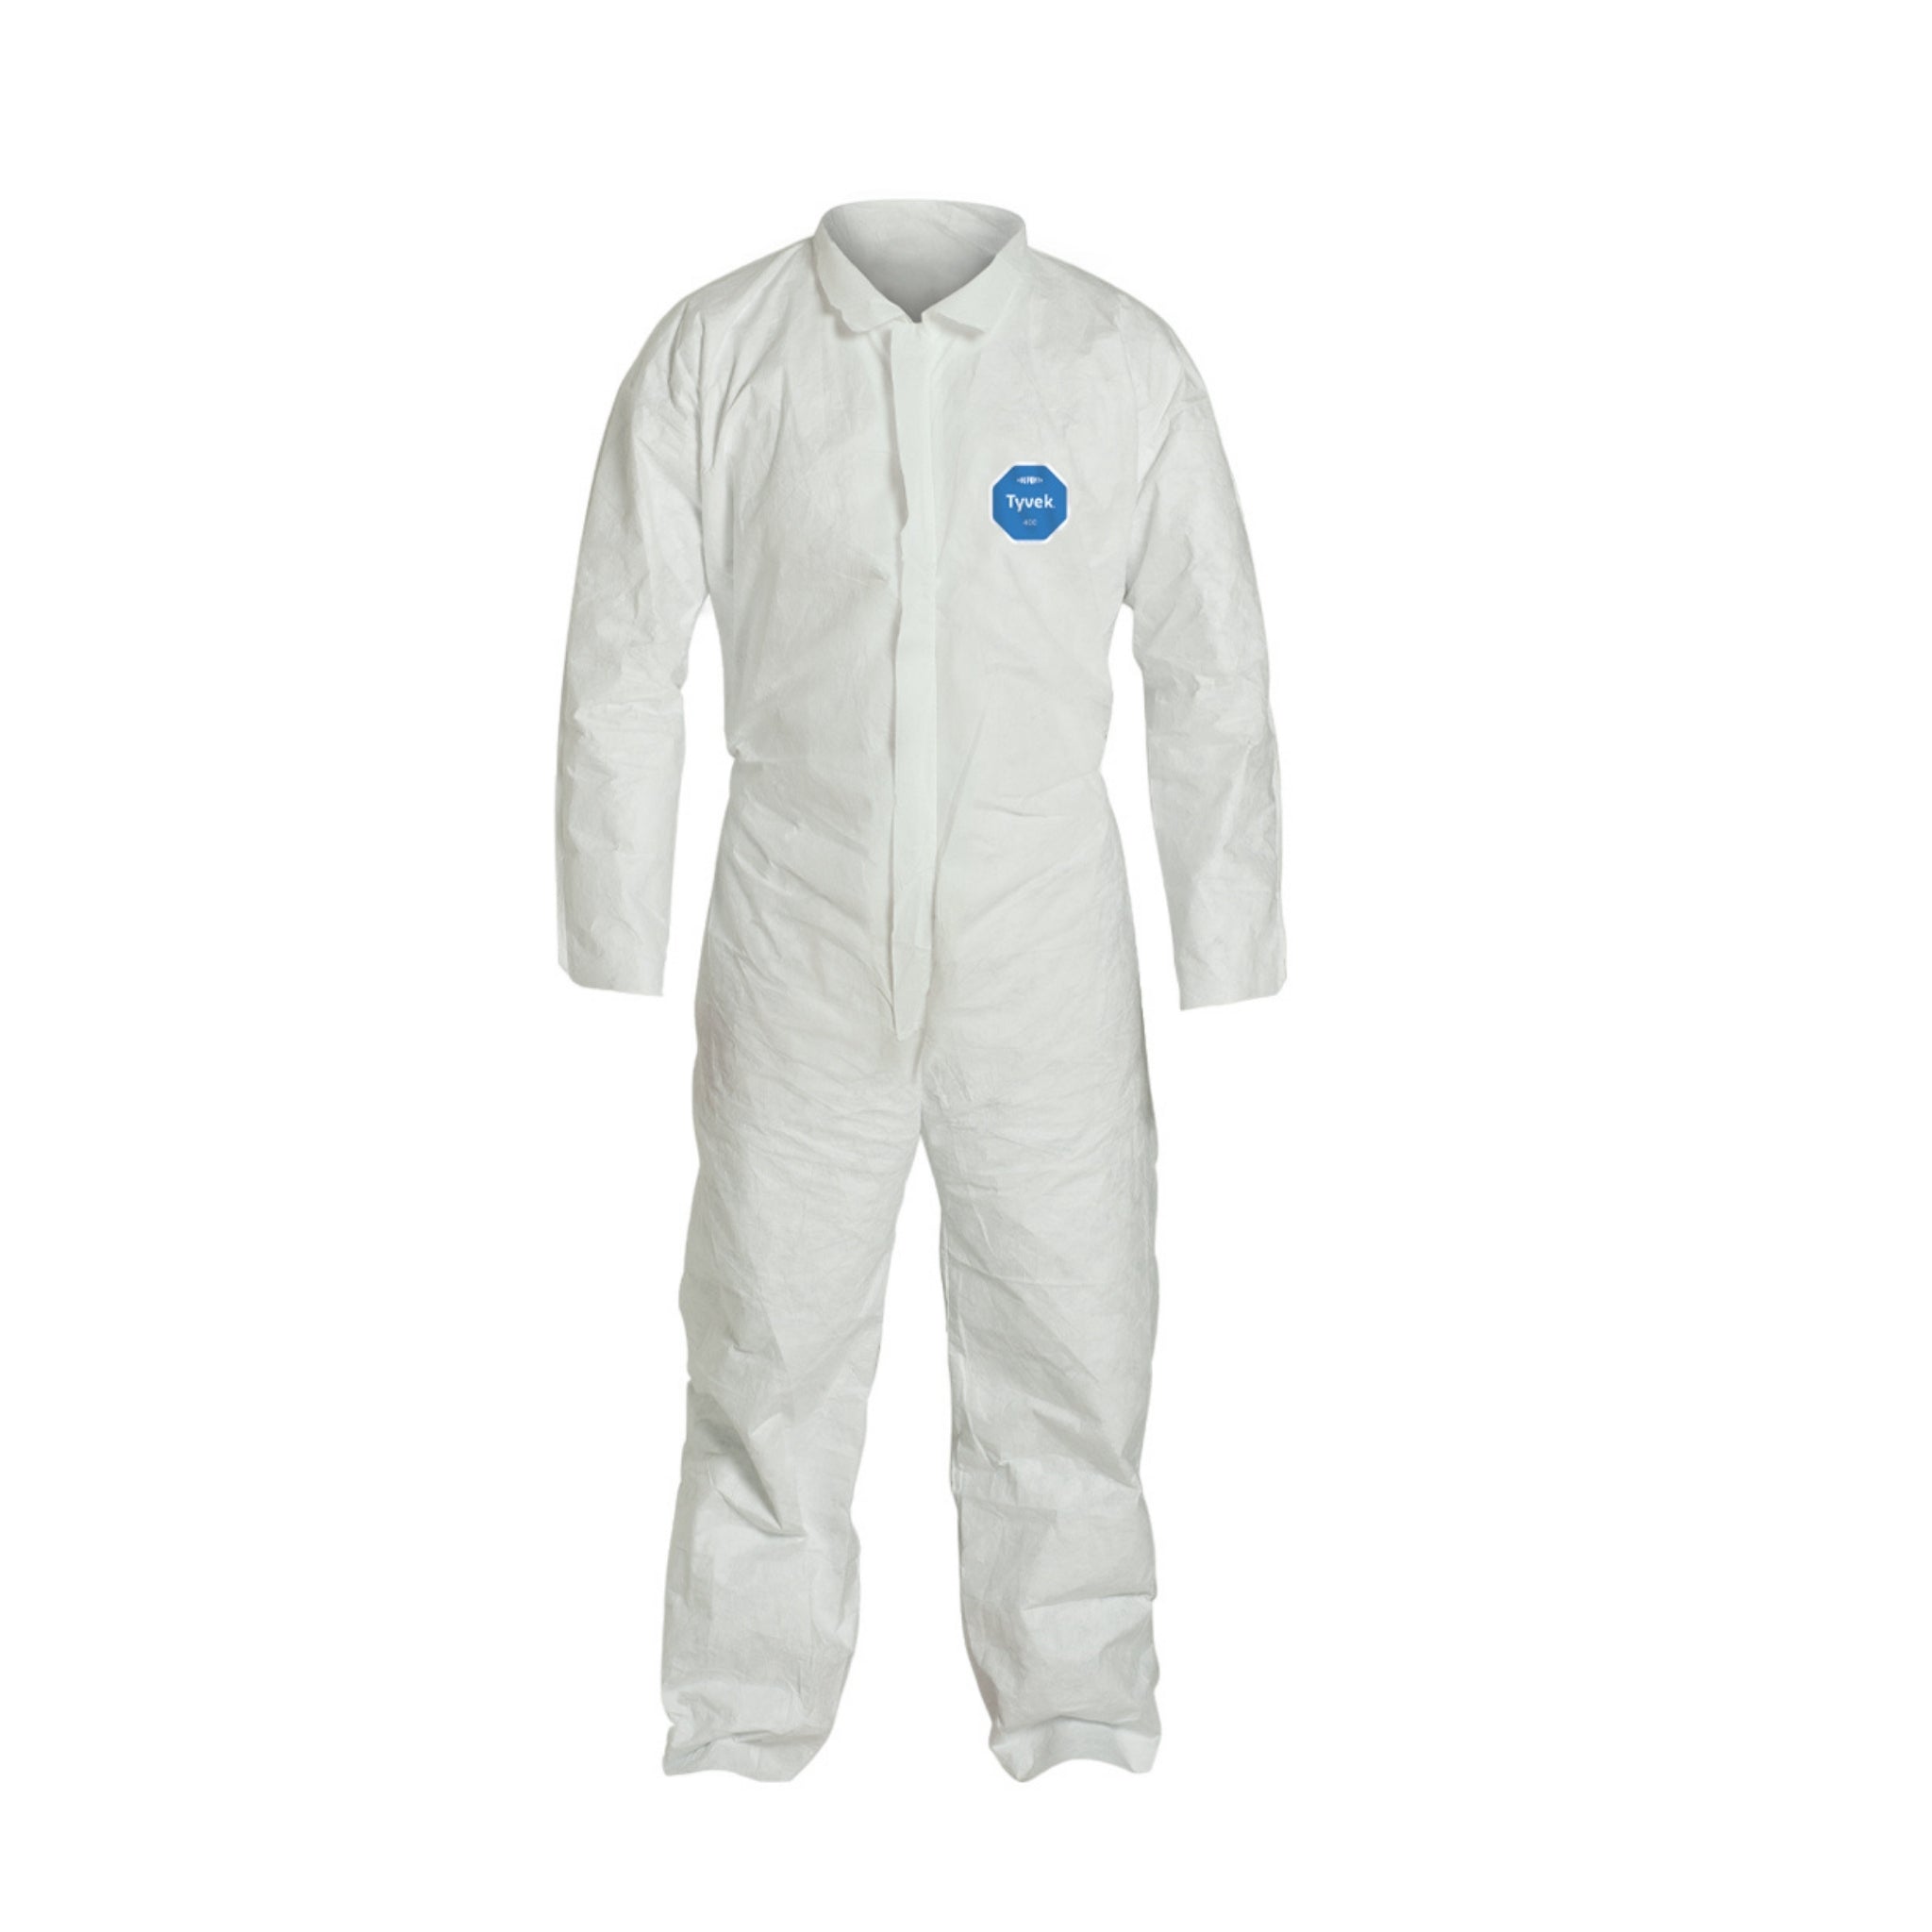 DuPont TY120S-Case of 25: Tyvek 400 Disposable Protective Coverall, White